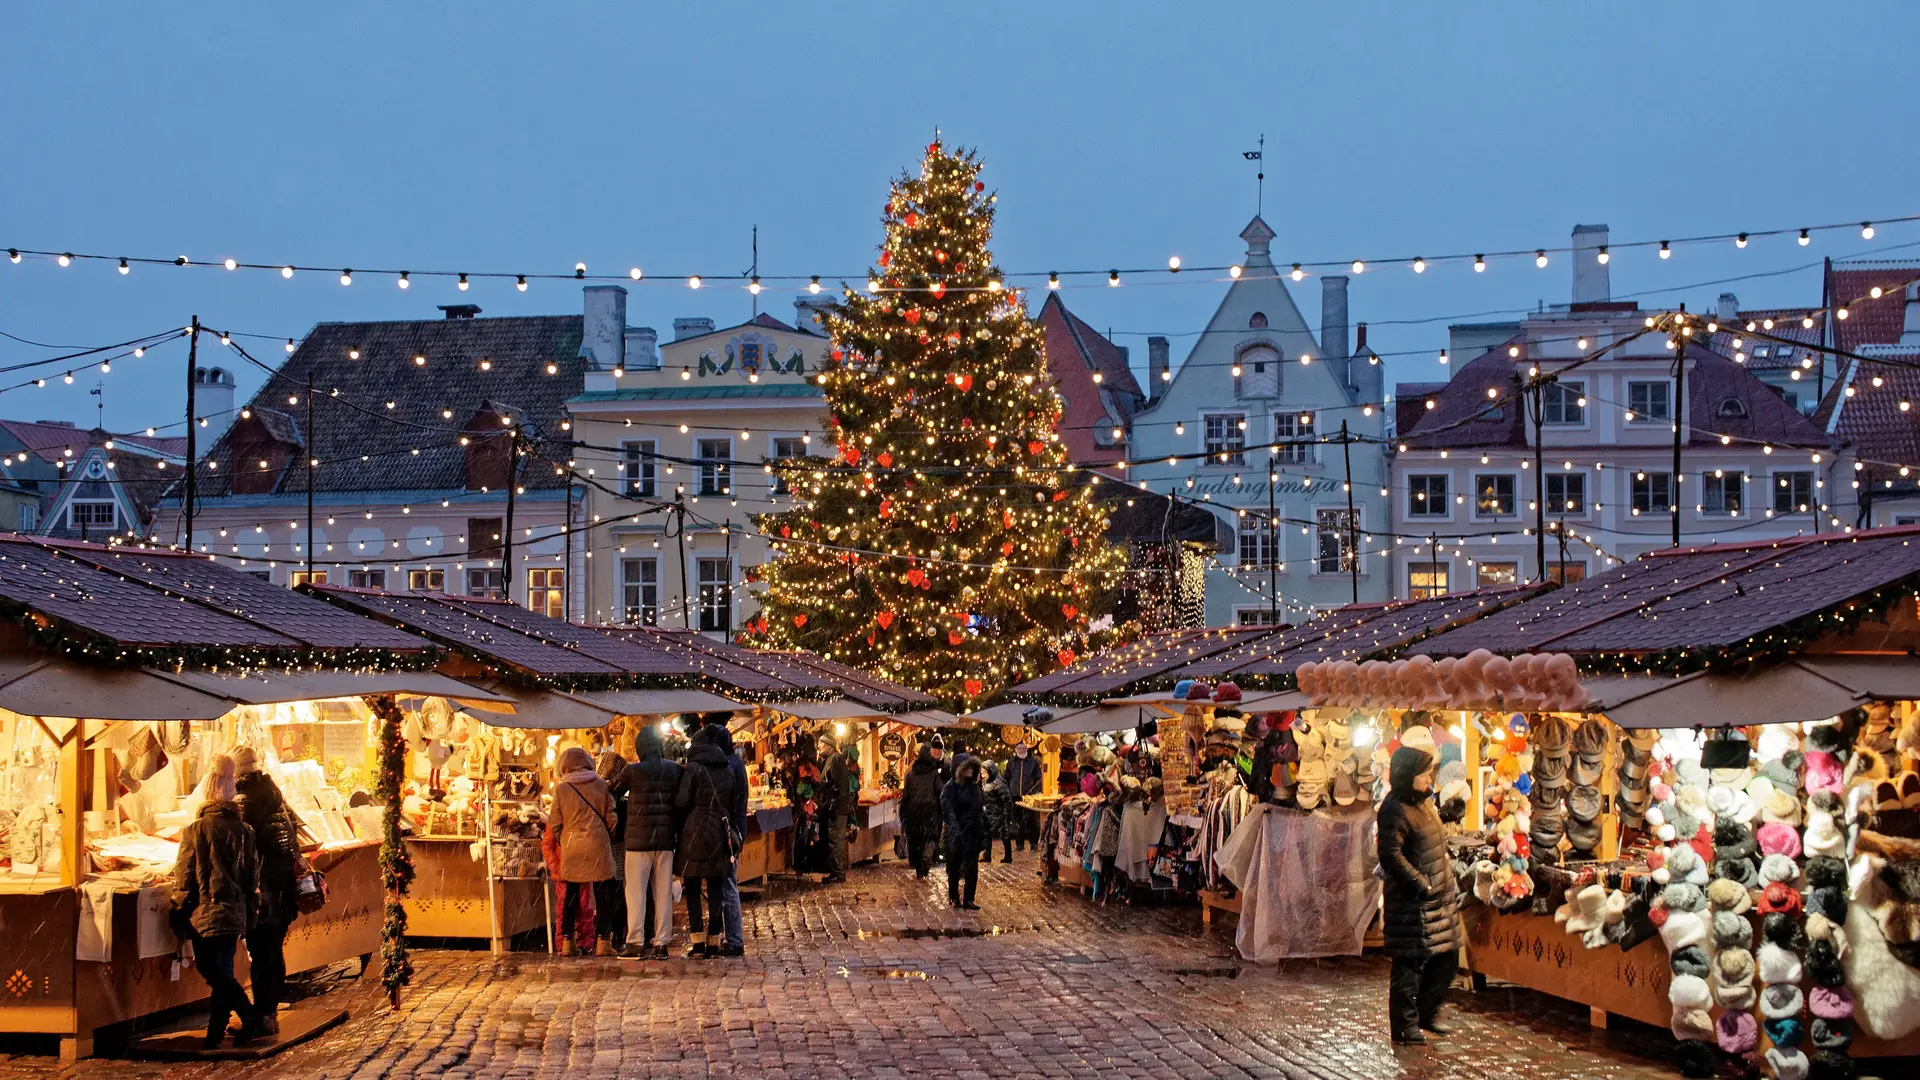 Town Hall Square christmas market, one of the best christmas markets in europe